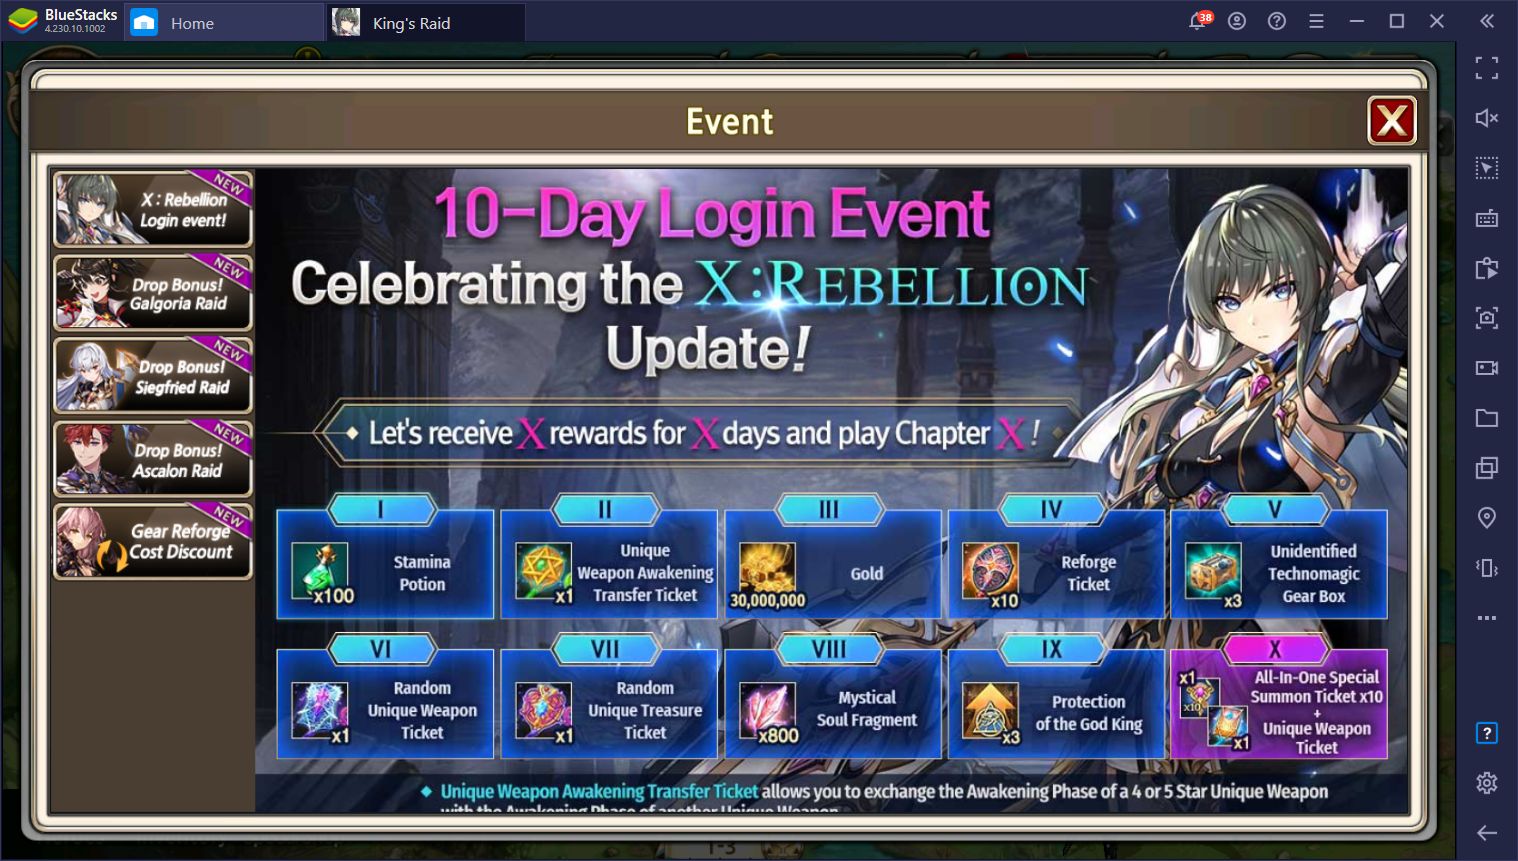 King’s Raid X: Rebellion - Overview on all the Ongoing Events After August’s Massive Update